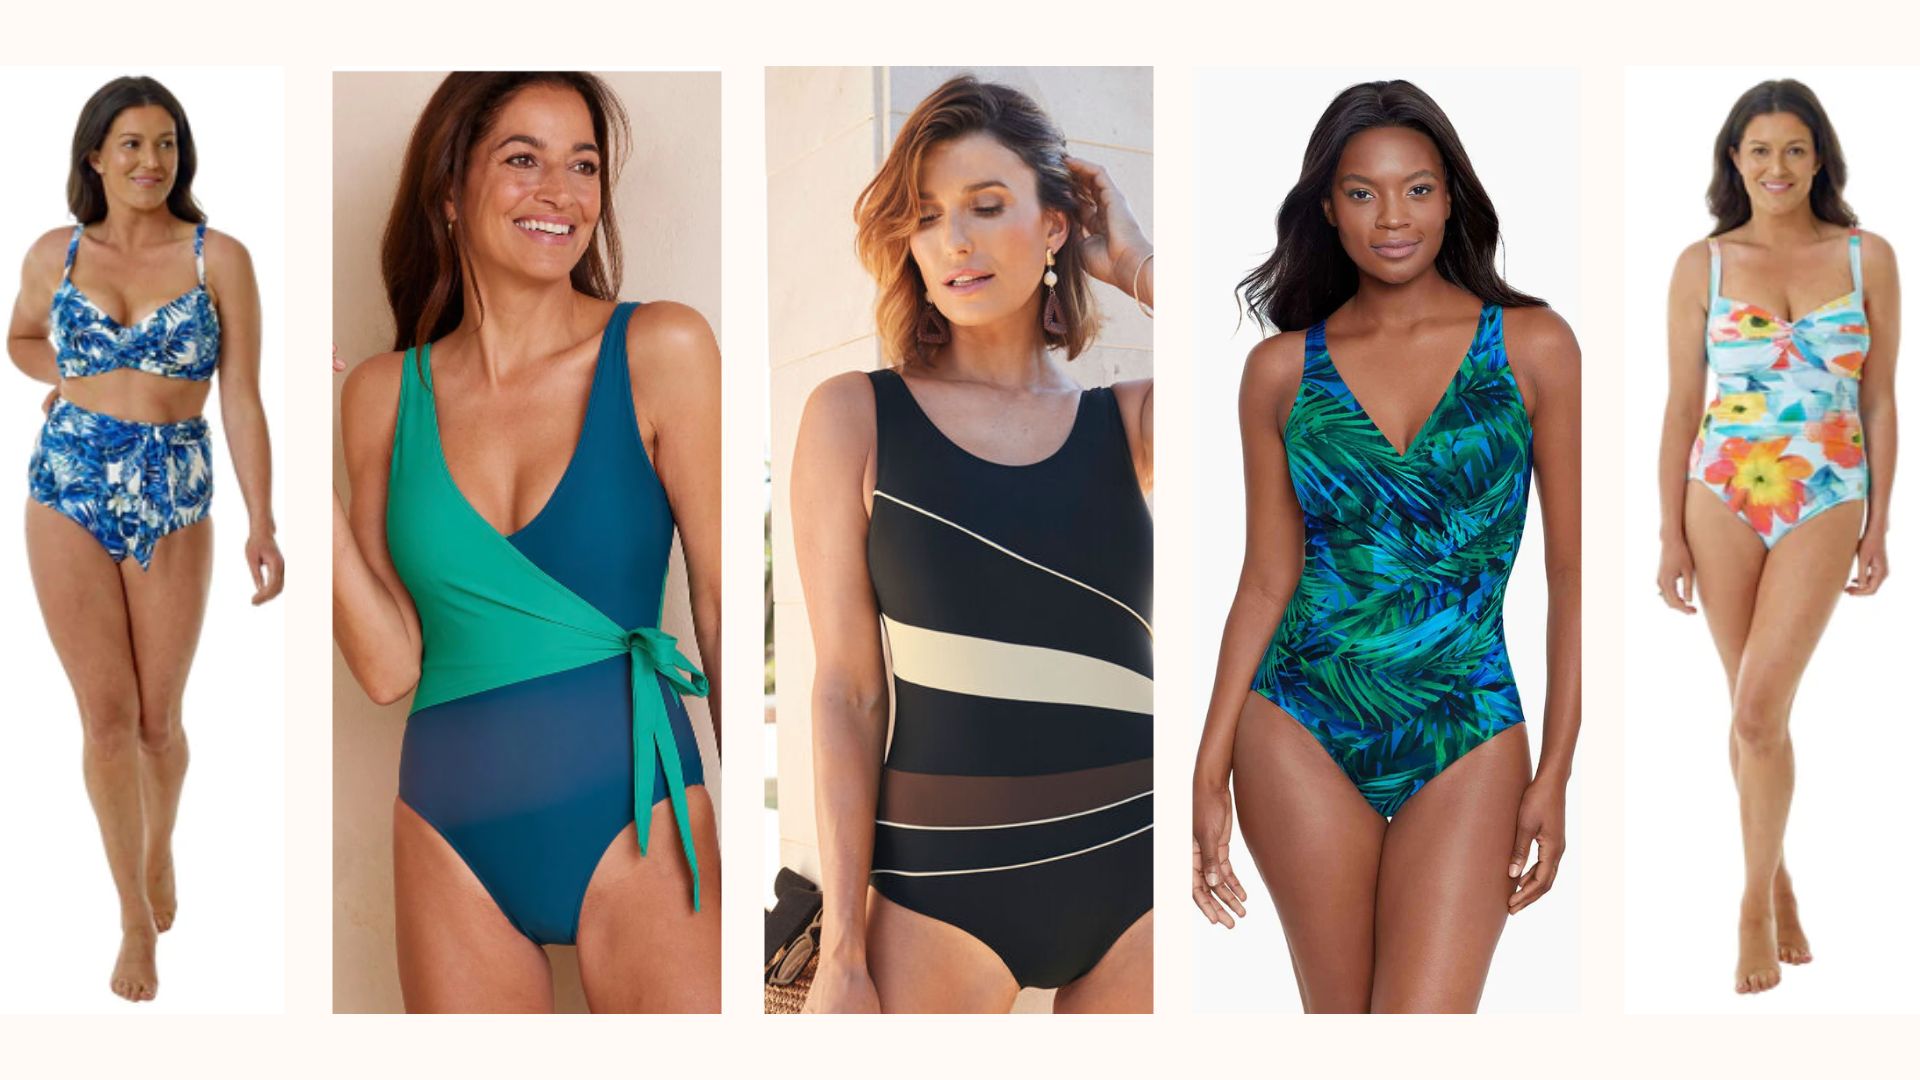 We round up the best bathing suits for women over 50 | Woman & Home